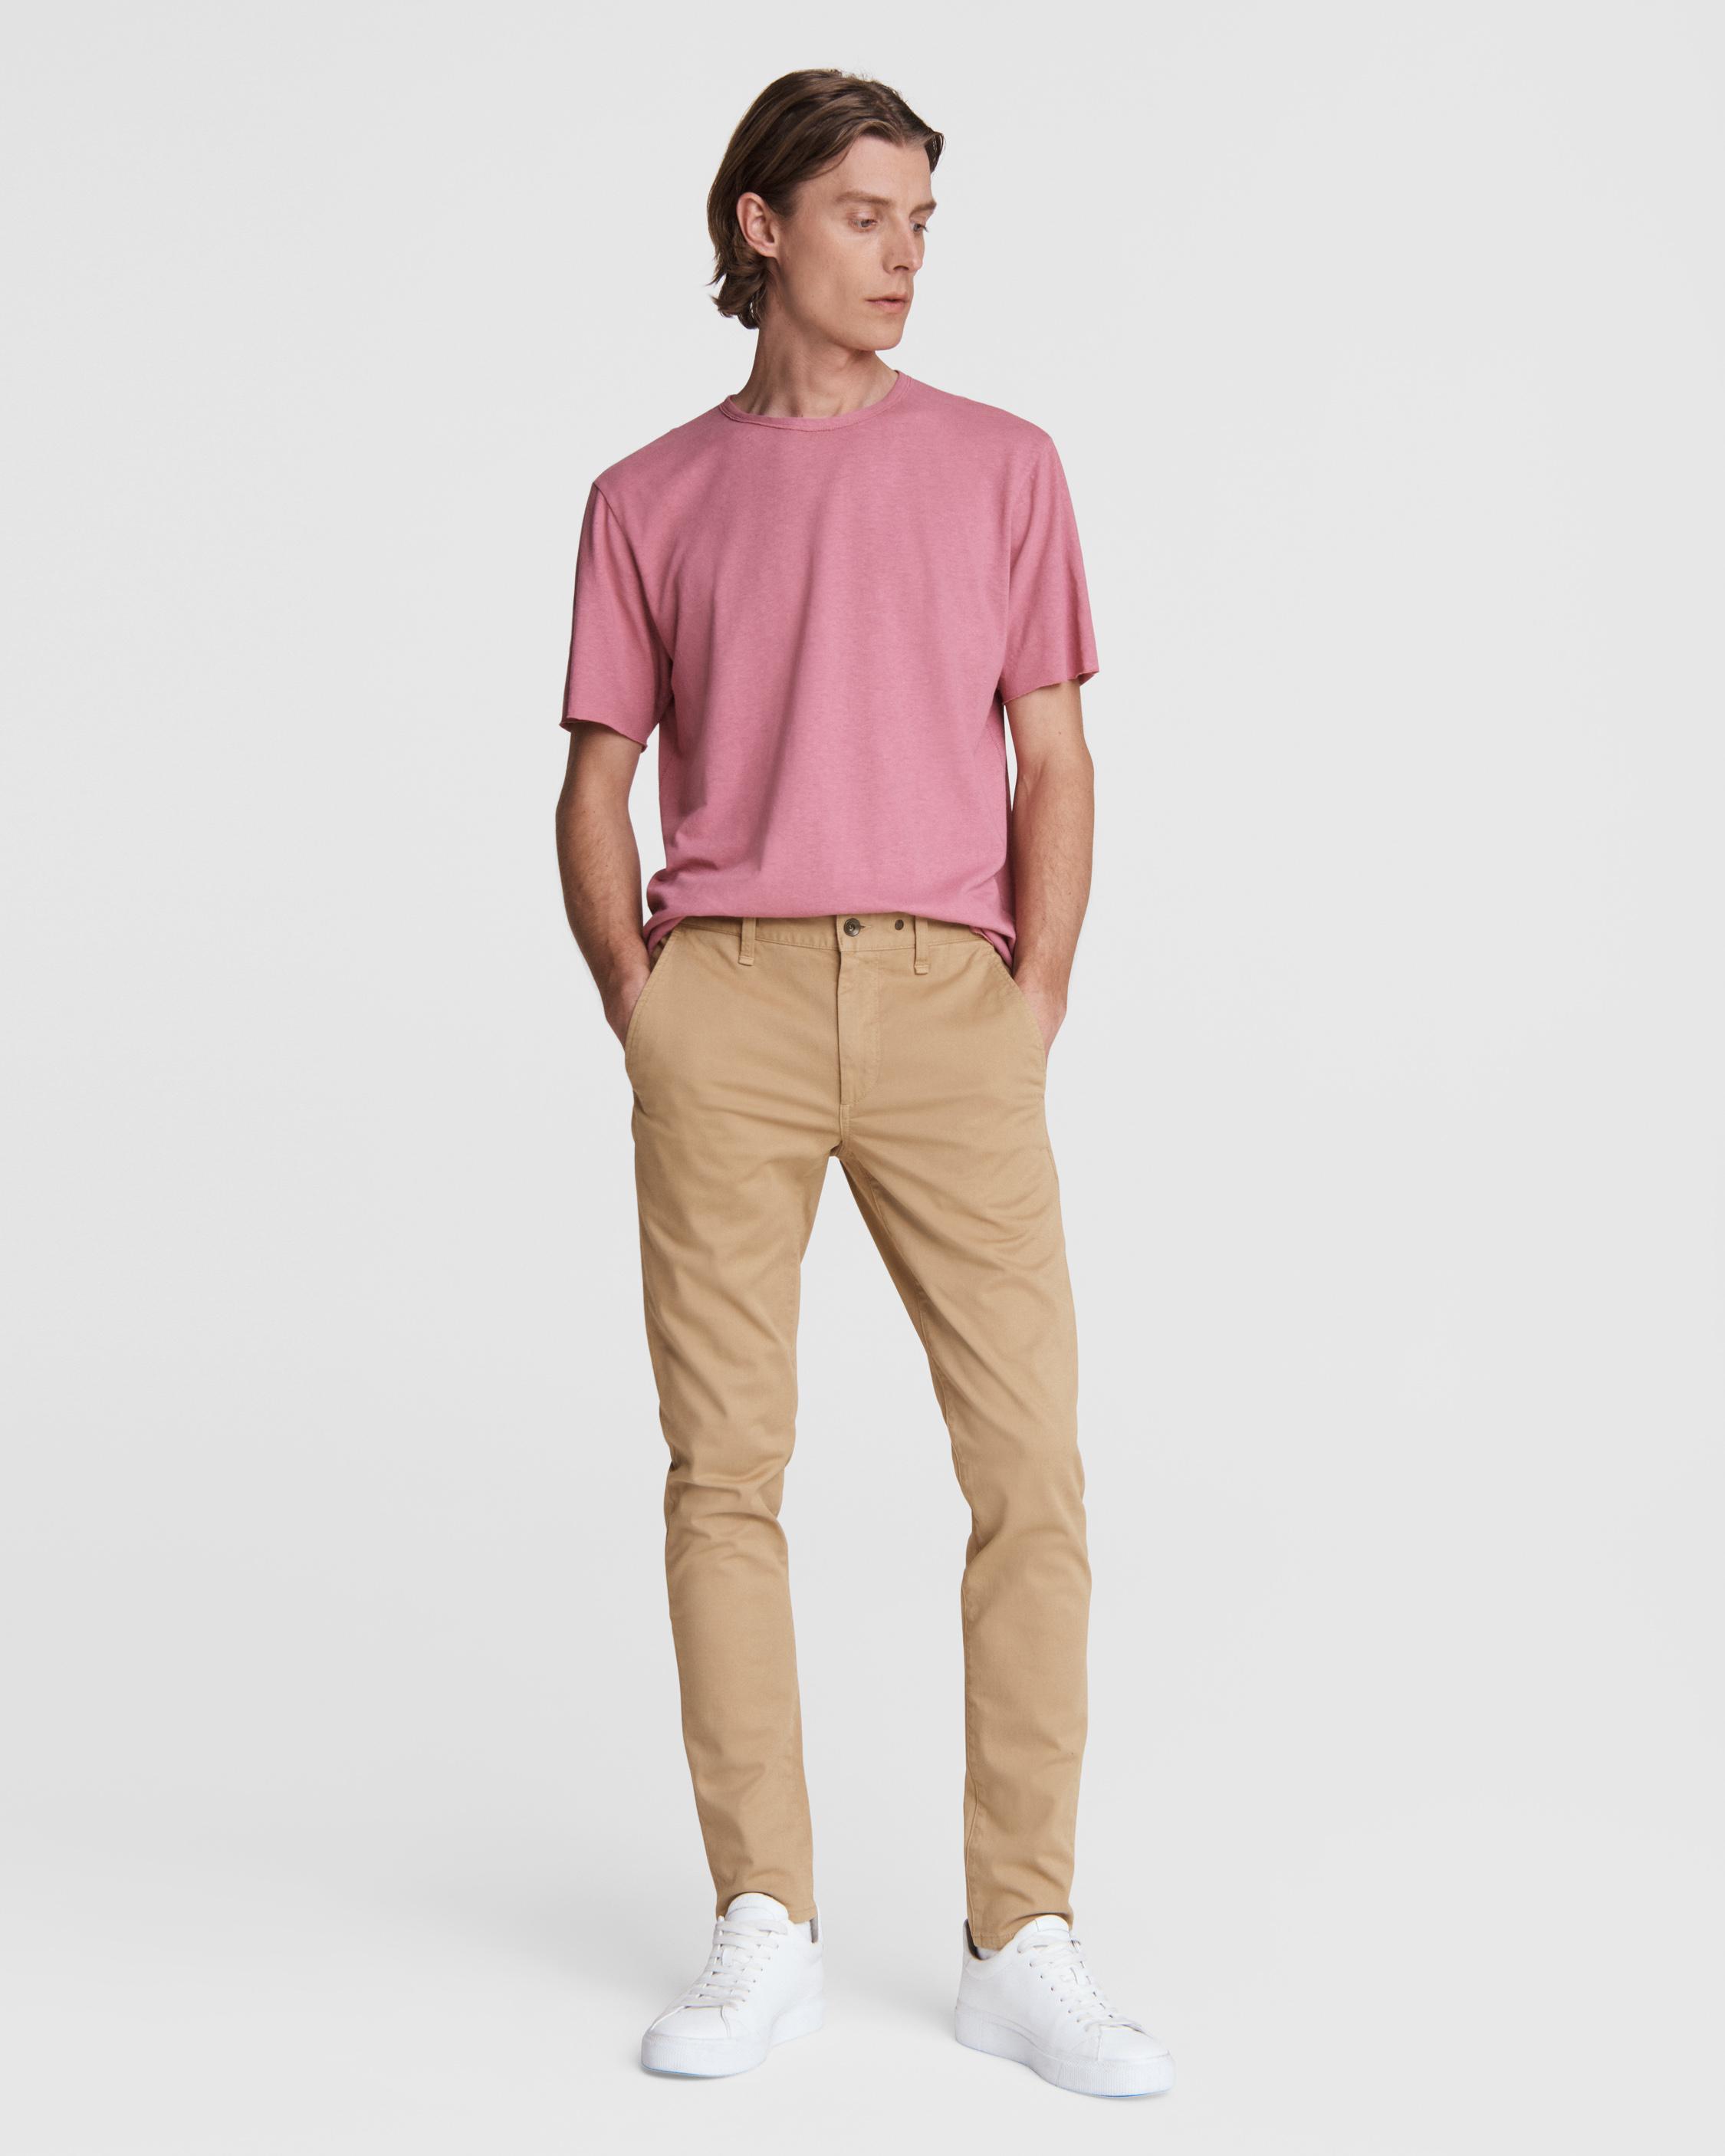 https://cdn.media.amplience.net/i/rb/MBW22S712236ML-288-A/Fit-1-Stretch-Twill-Chino-288?$large$&fmt=auto